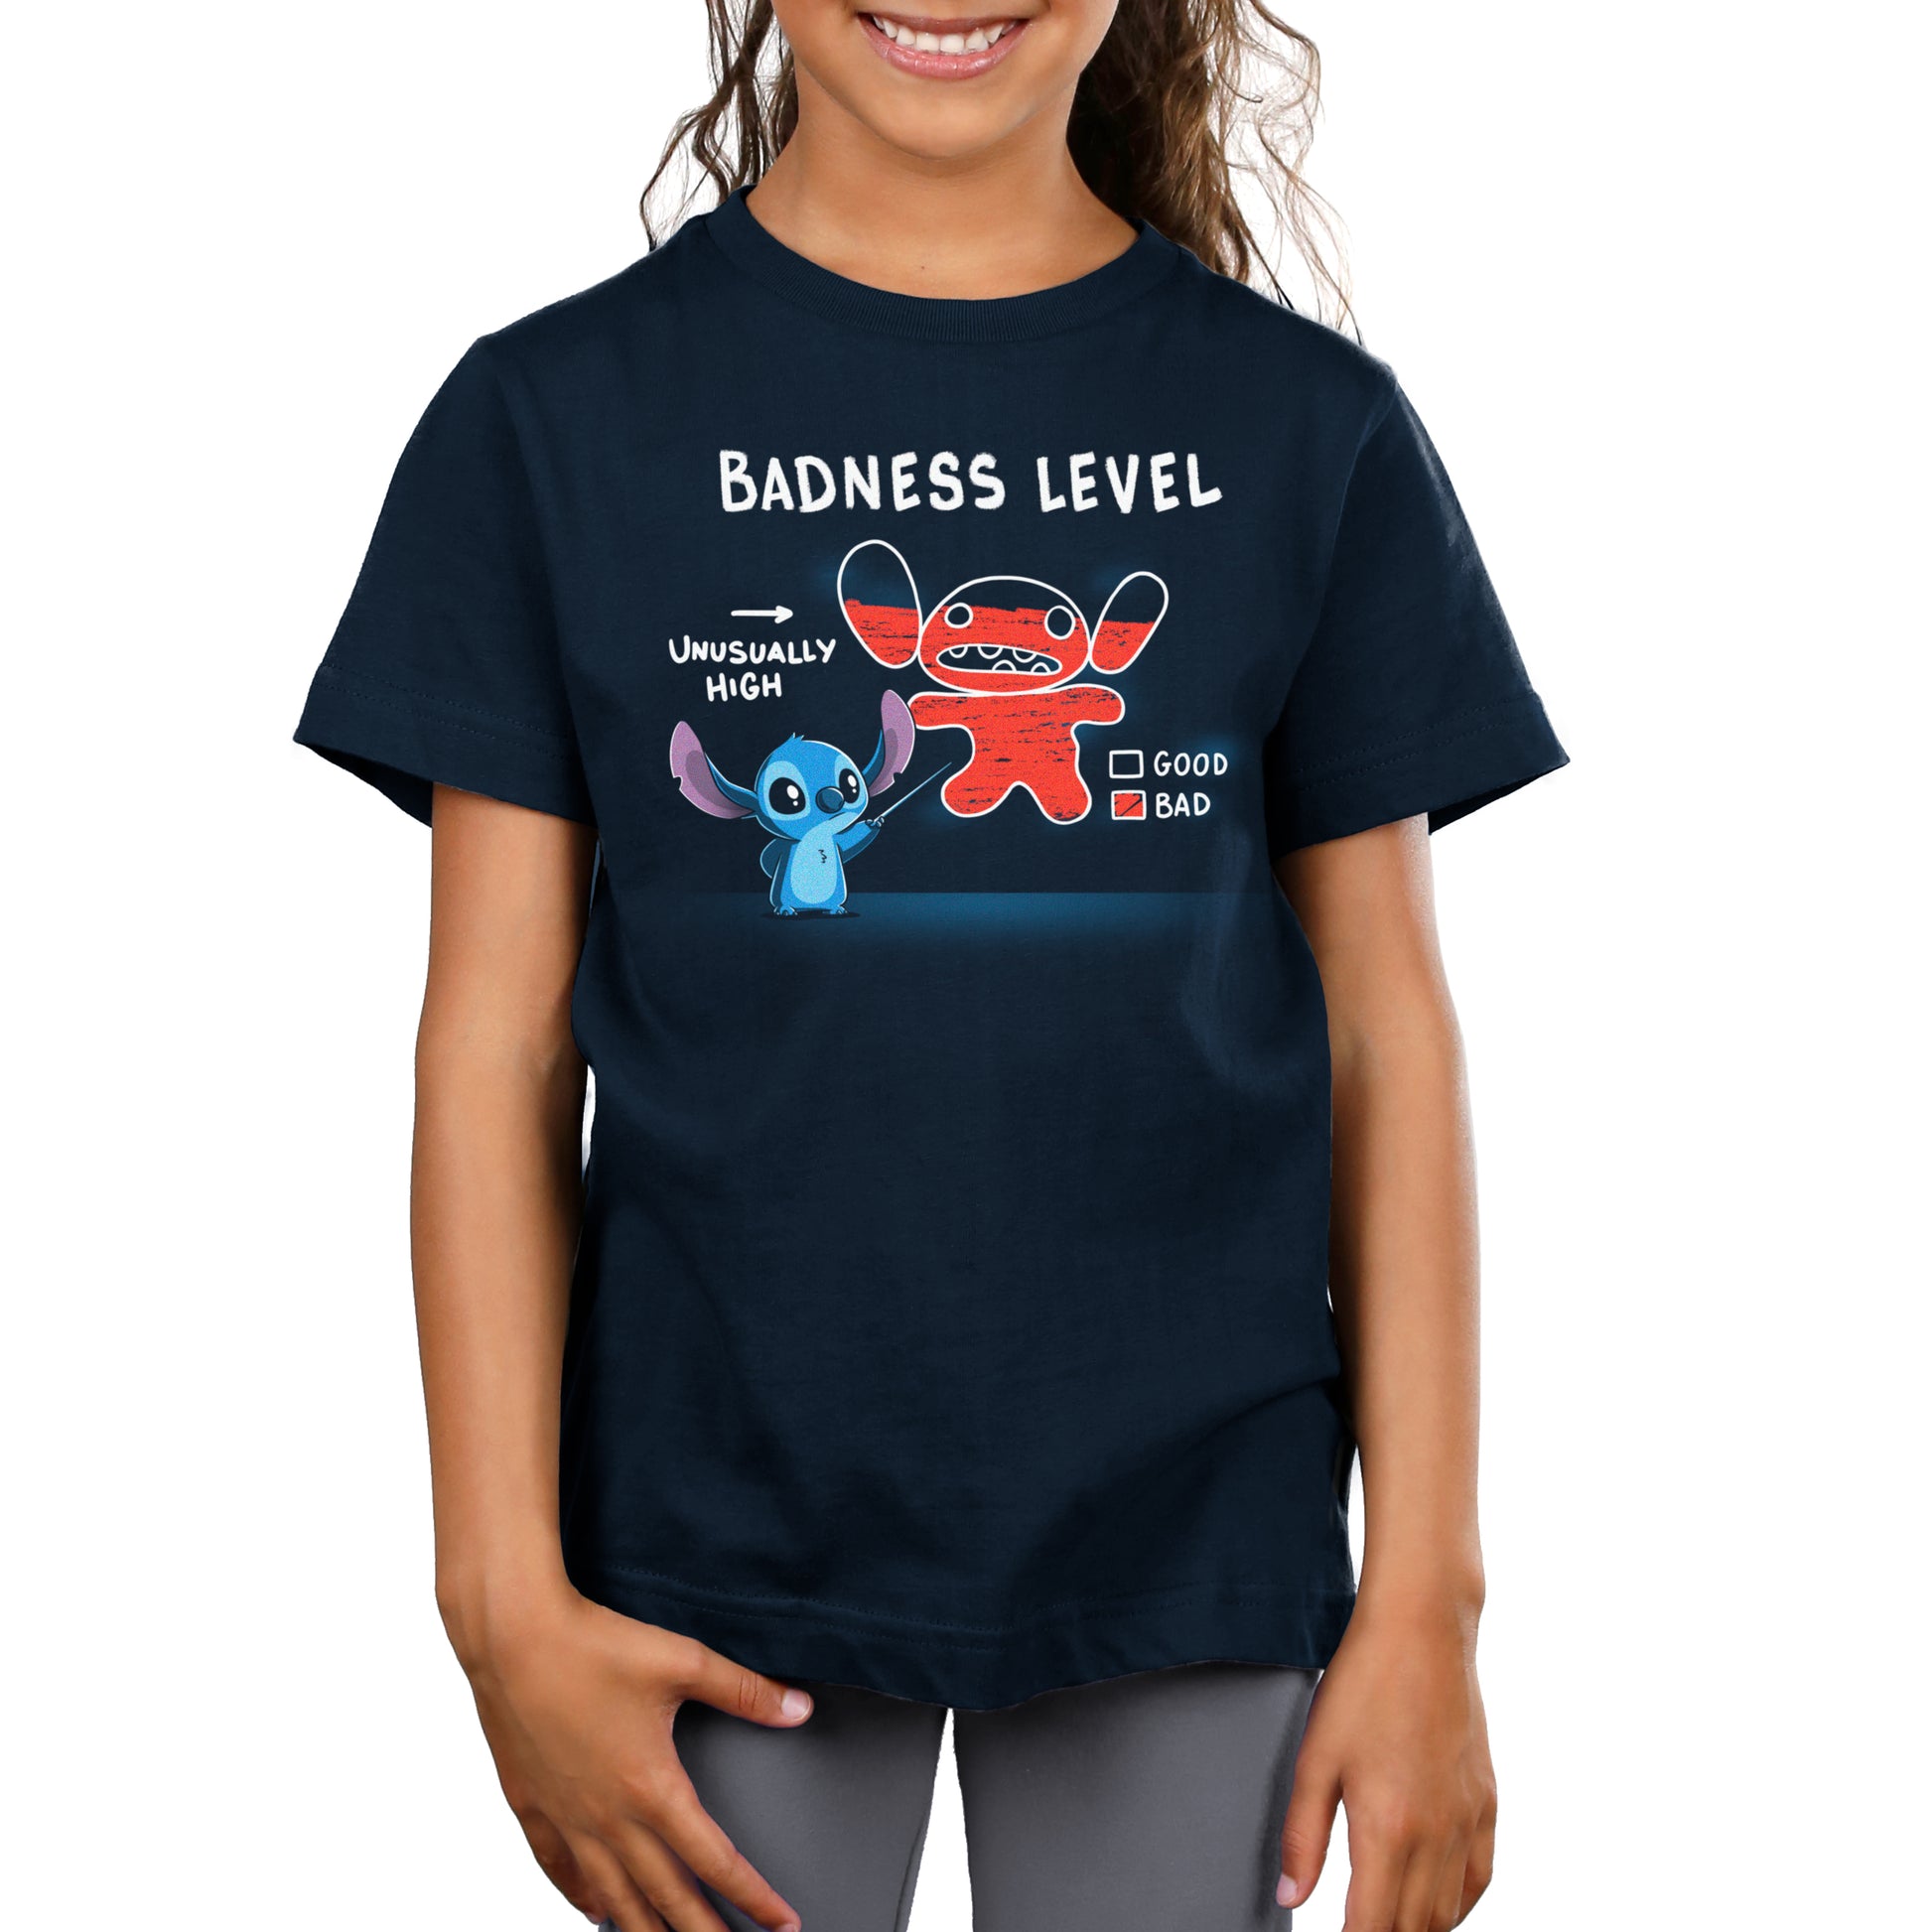 A Disney girl wearing an official licensed Disney Stitch's Badness Level t-shirt.